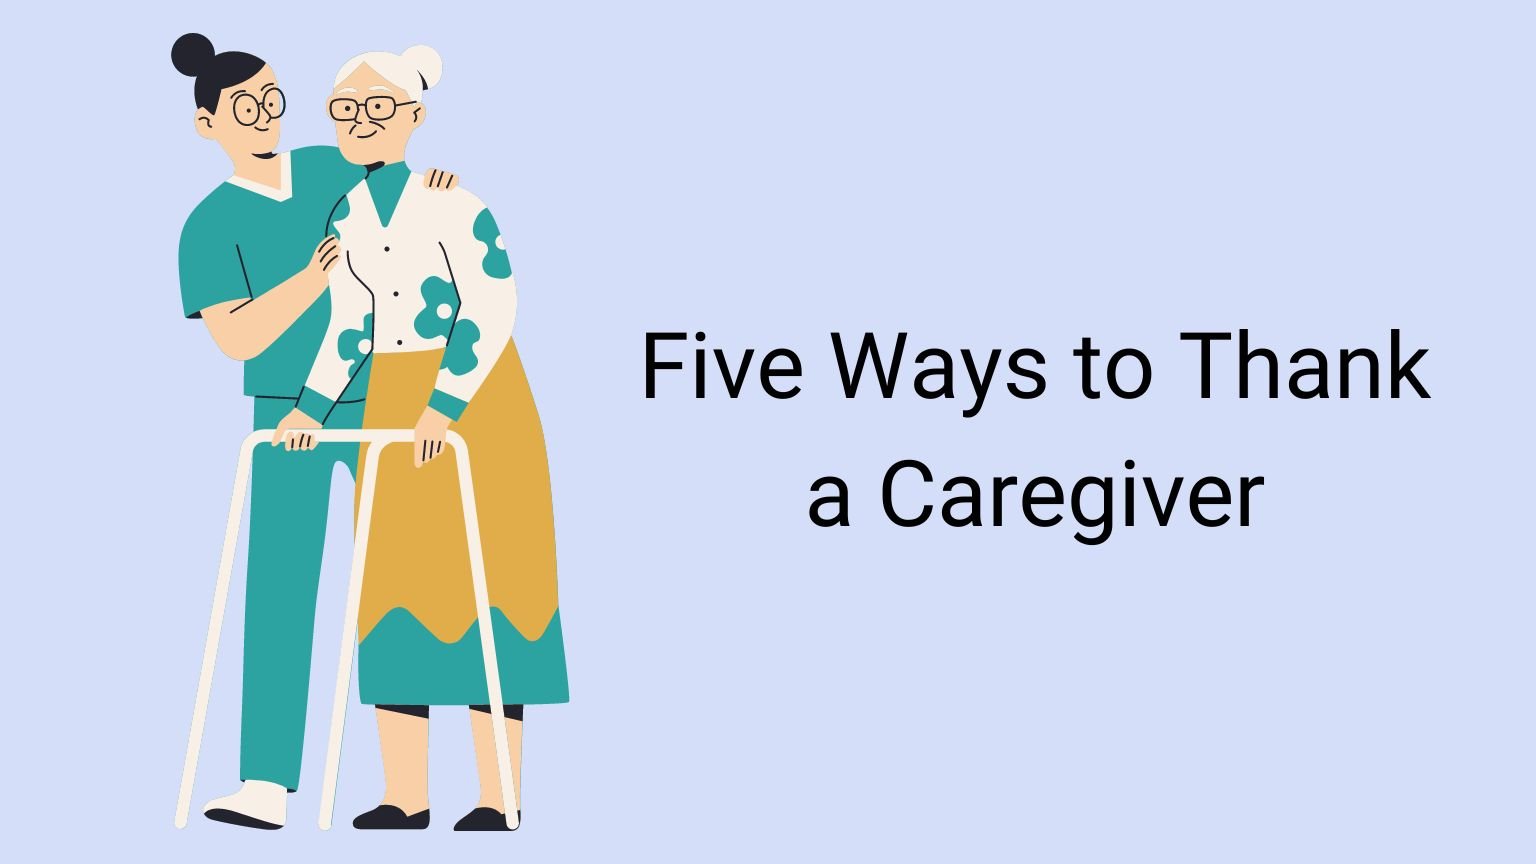 Five Ways to Thank a Caregiver